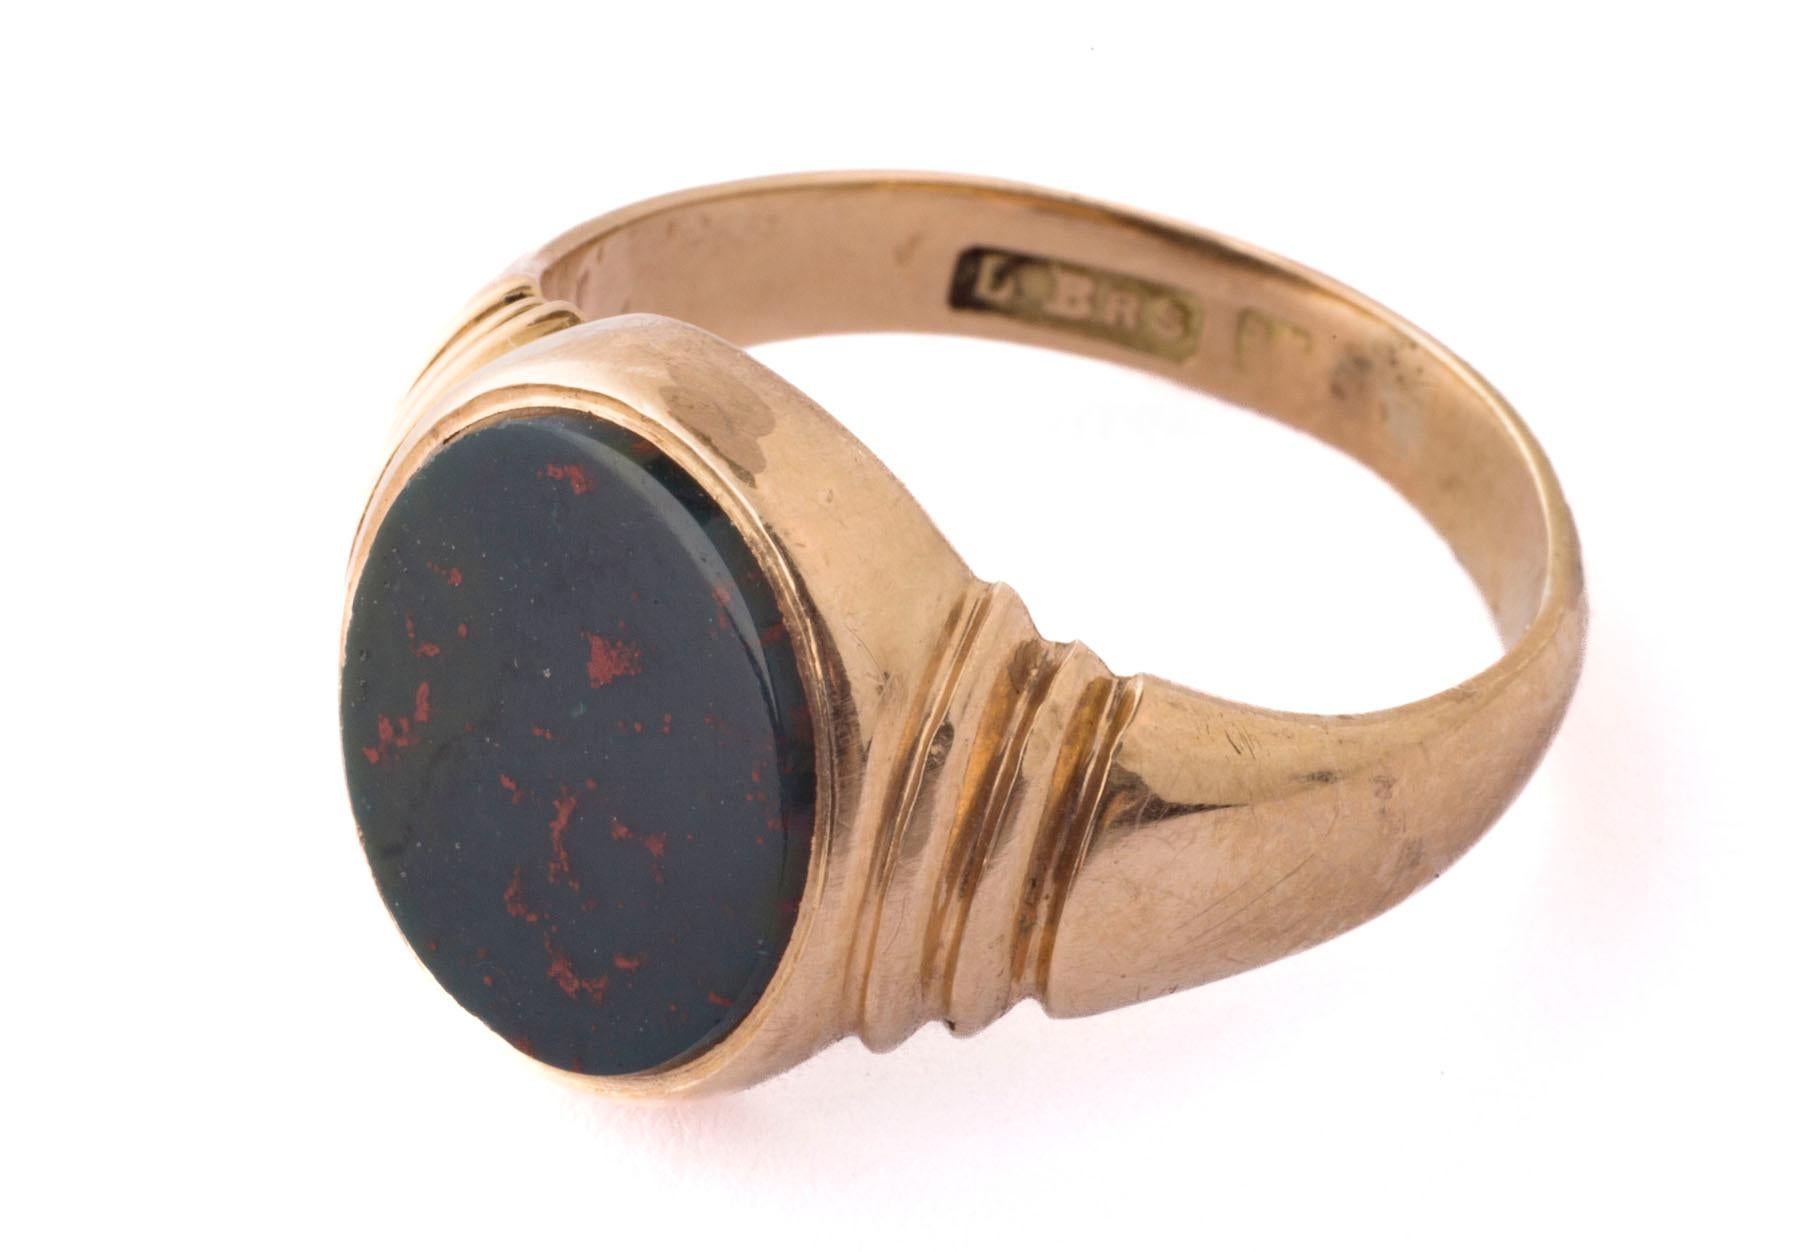 A clean 15kt gold signet ring that has not been engraved. This gives you the opportunity to engrave the stone to show your identity. The bloodstone has little red flecks that the photo does not show. The ring shaft shoulders are stunning. They are